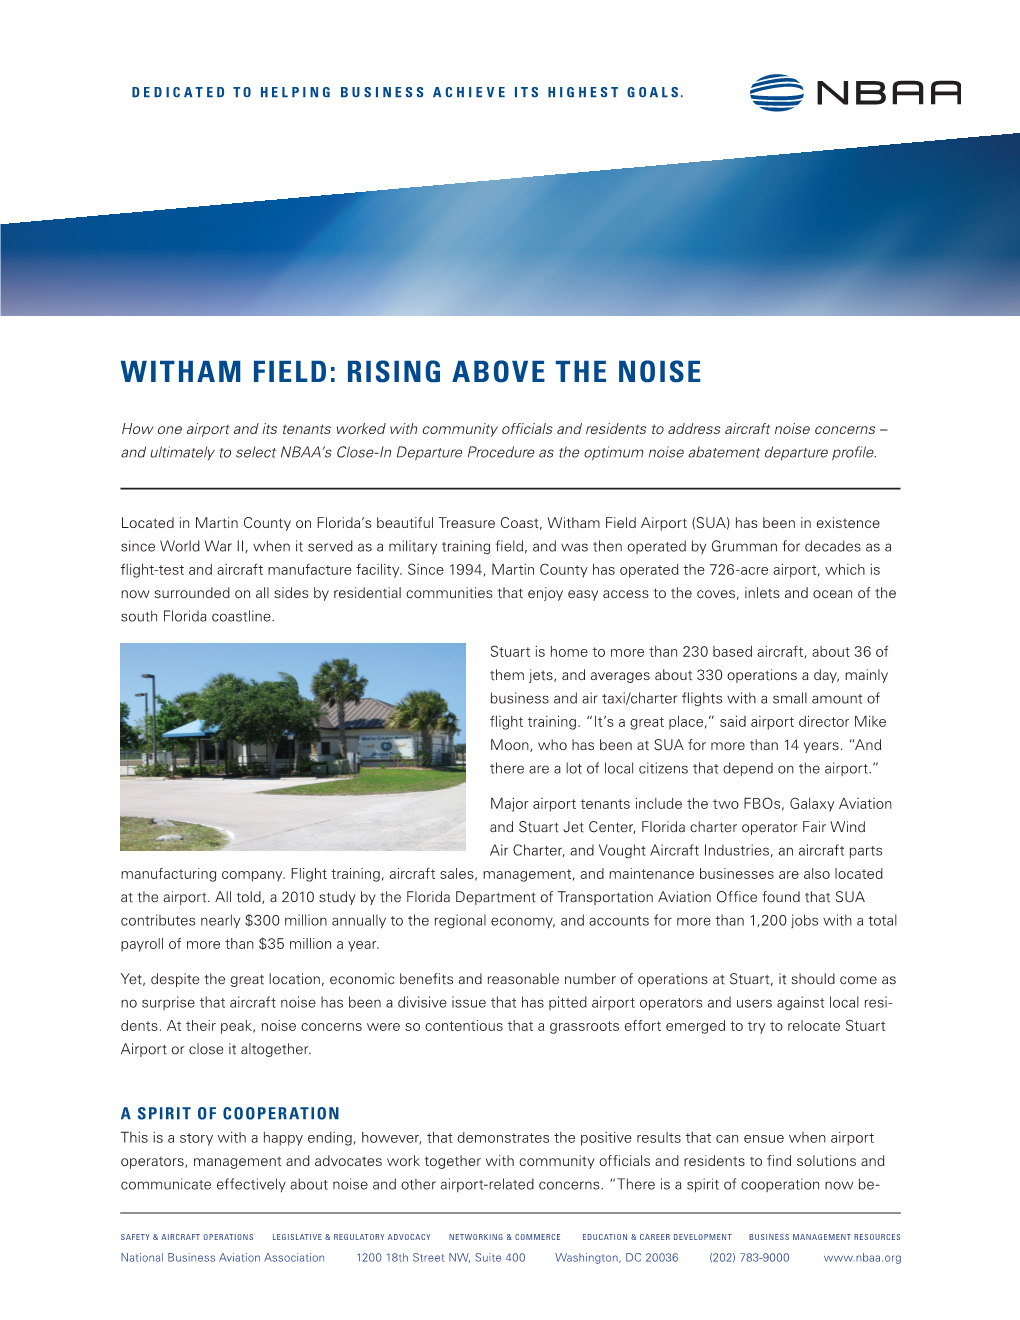 Witham Field: Rising Above the Noise